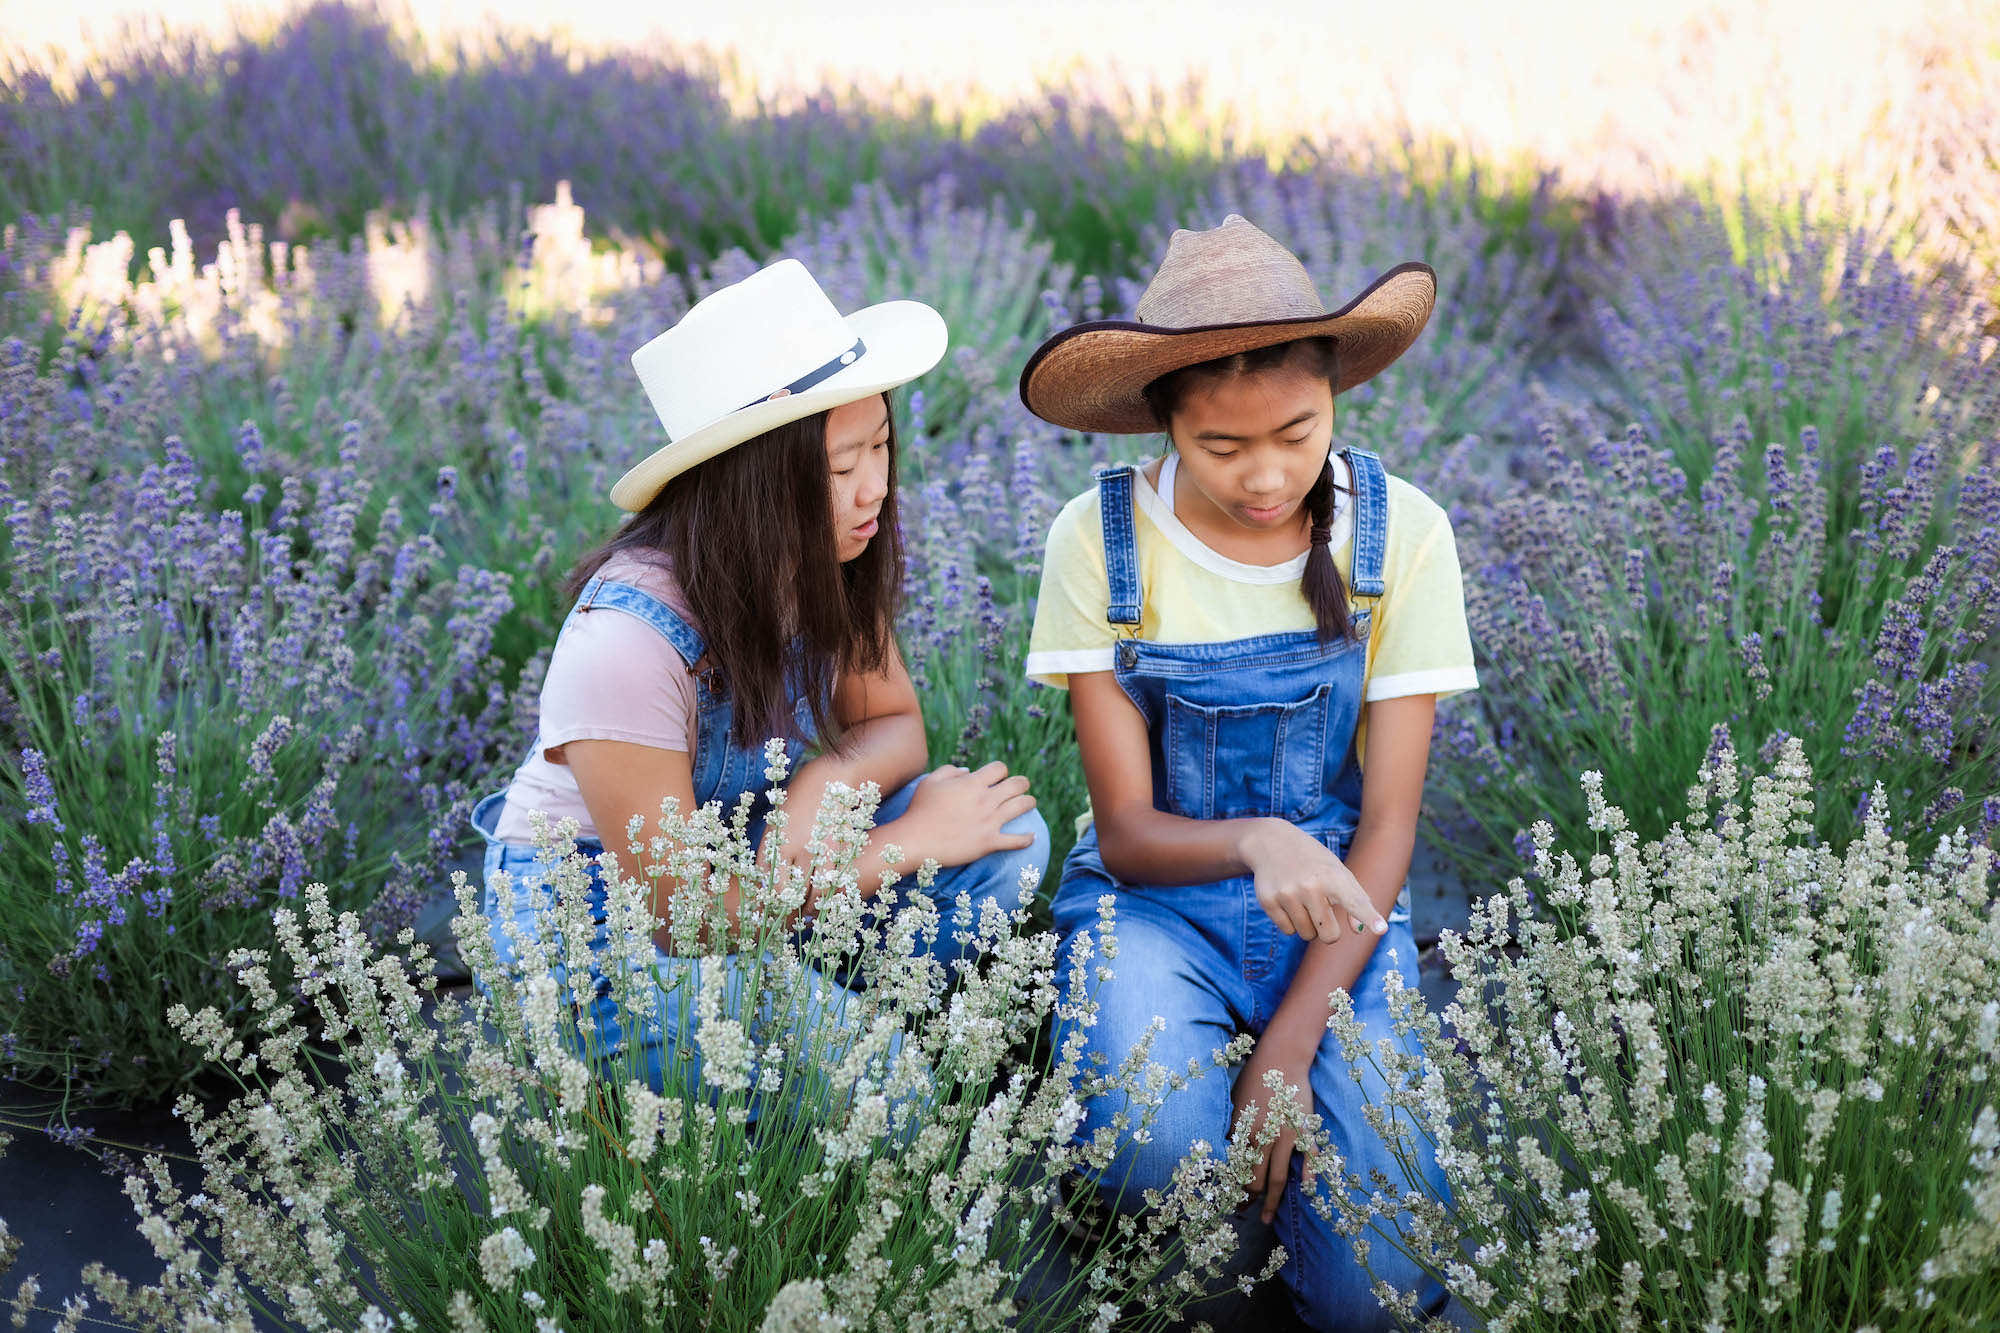 Picking fresh-smelling lavender is a favorite activity!